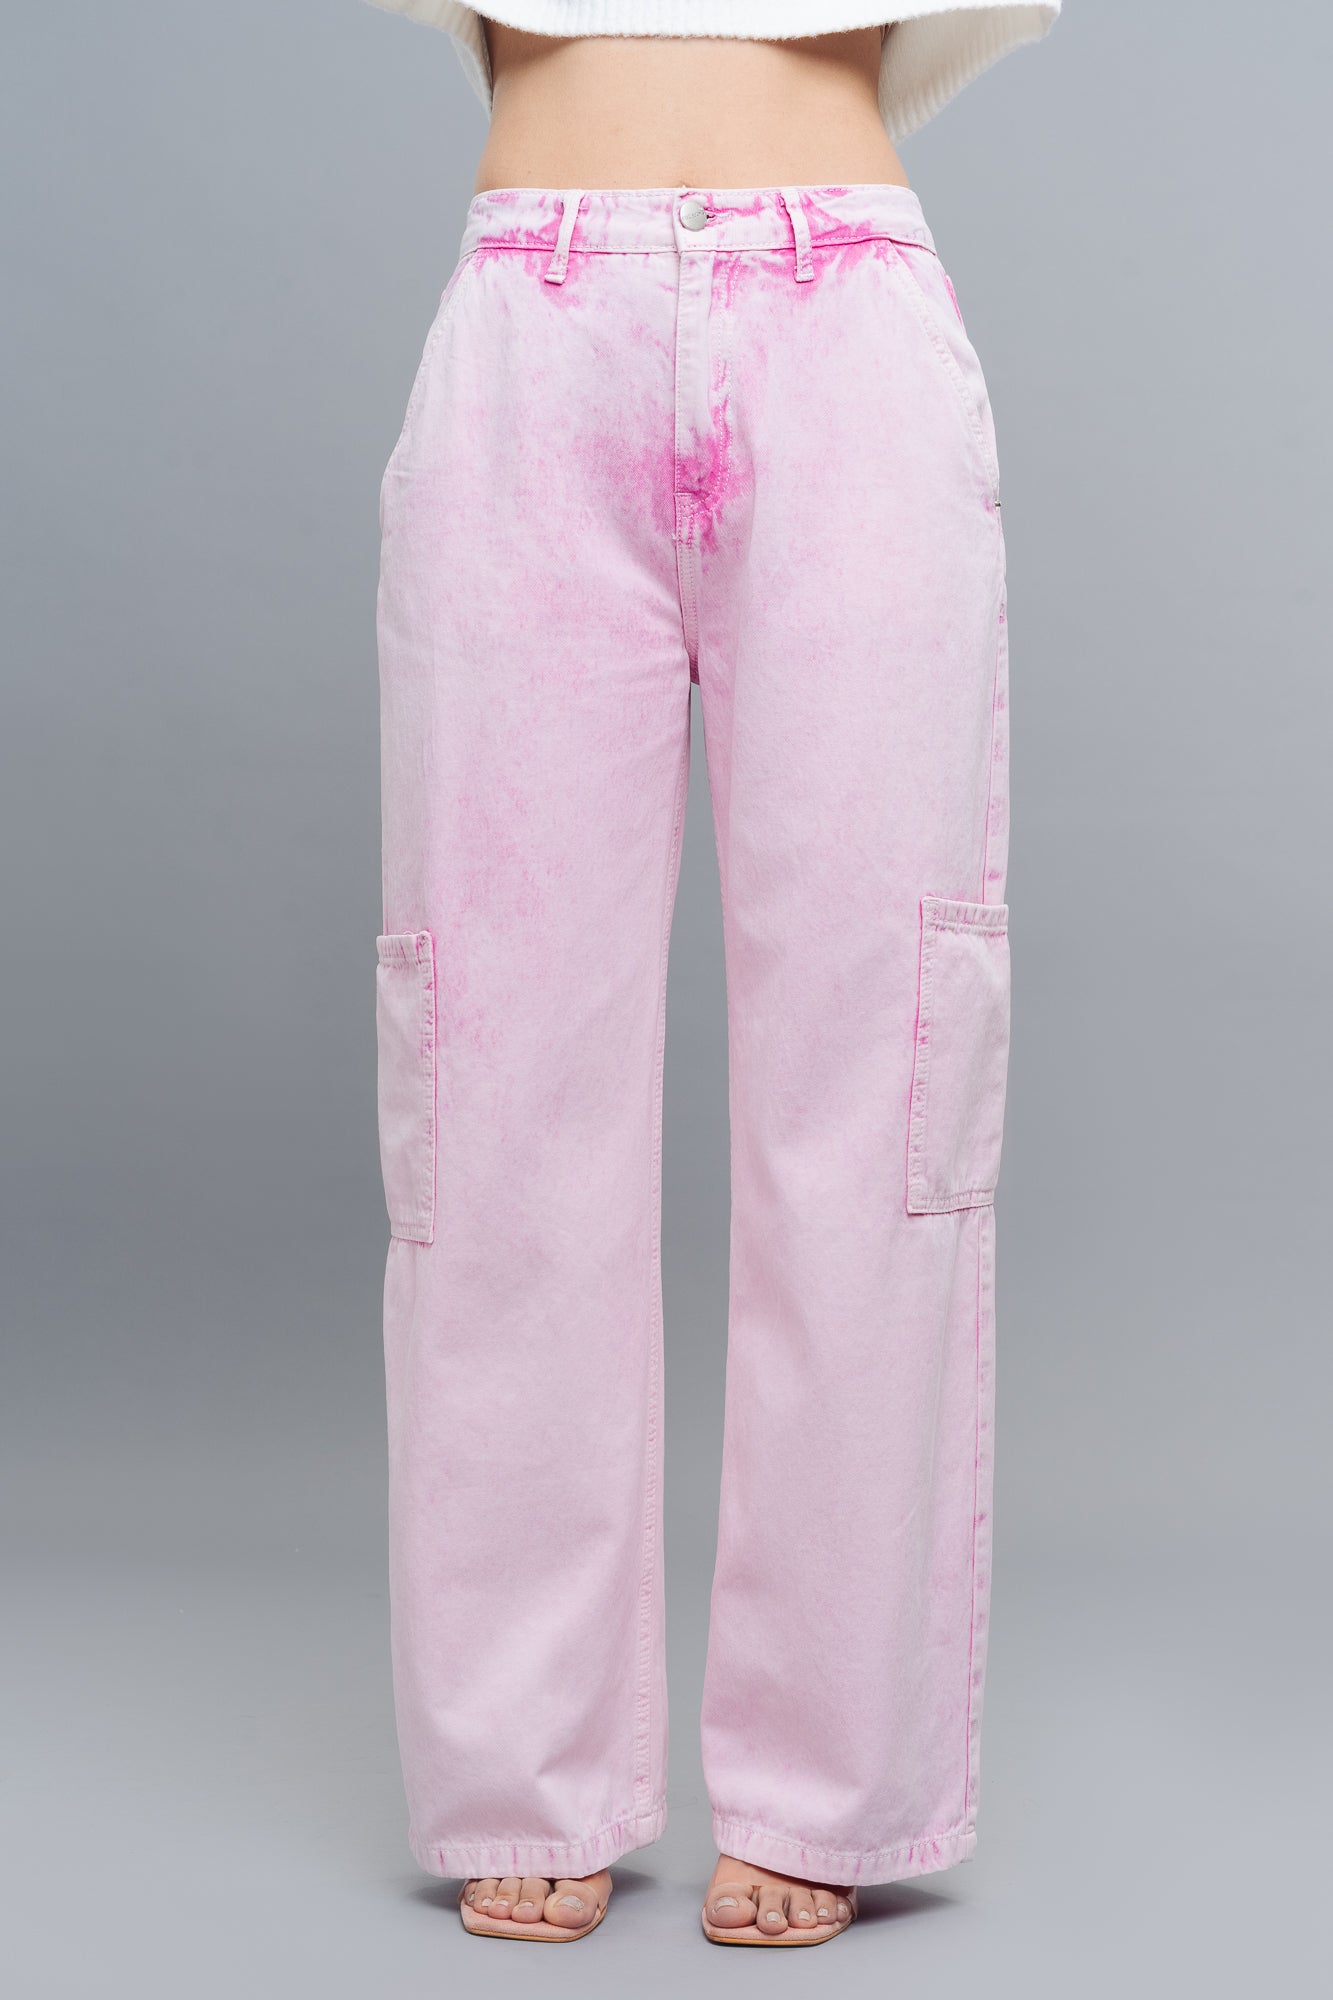 Crepe pink cargo jeans